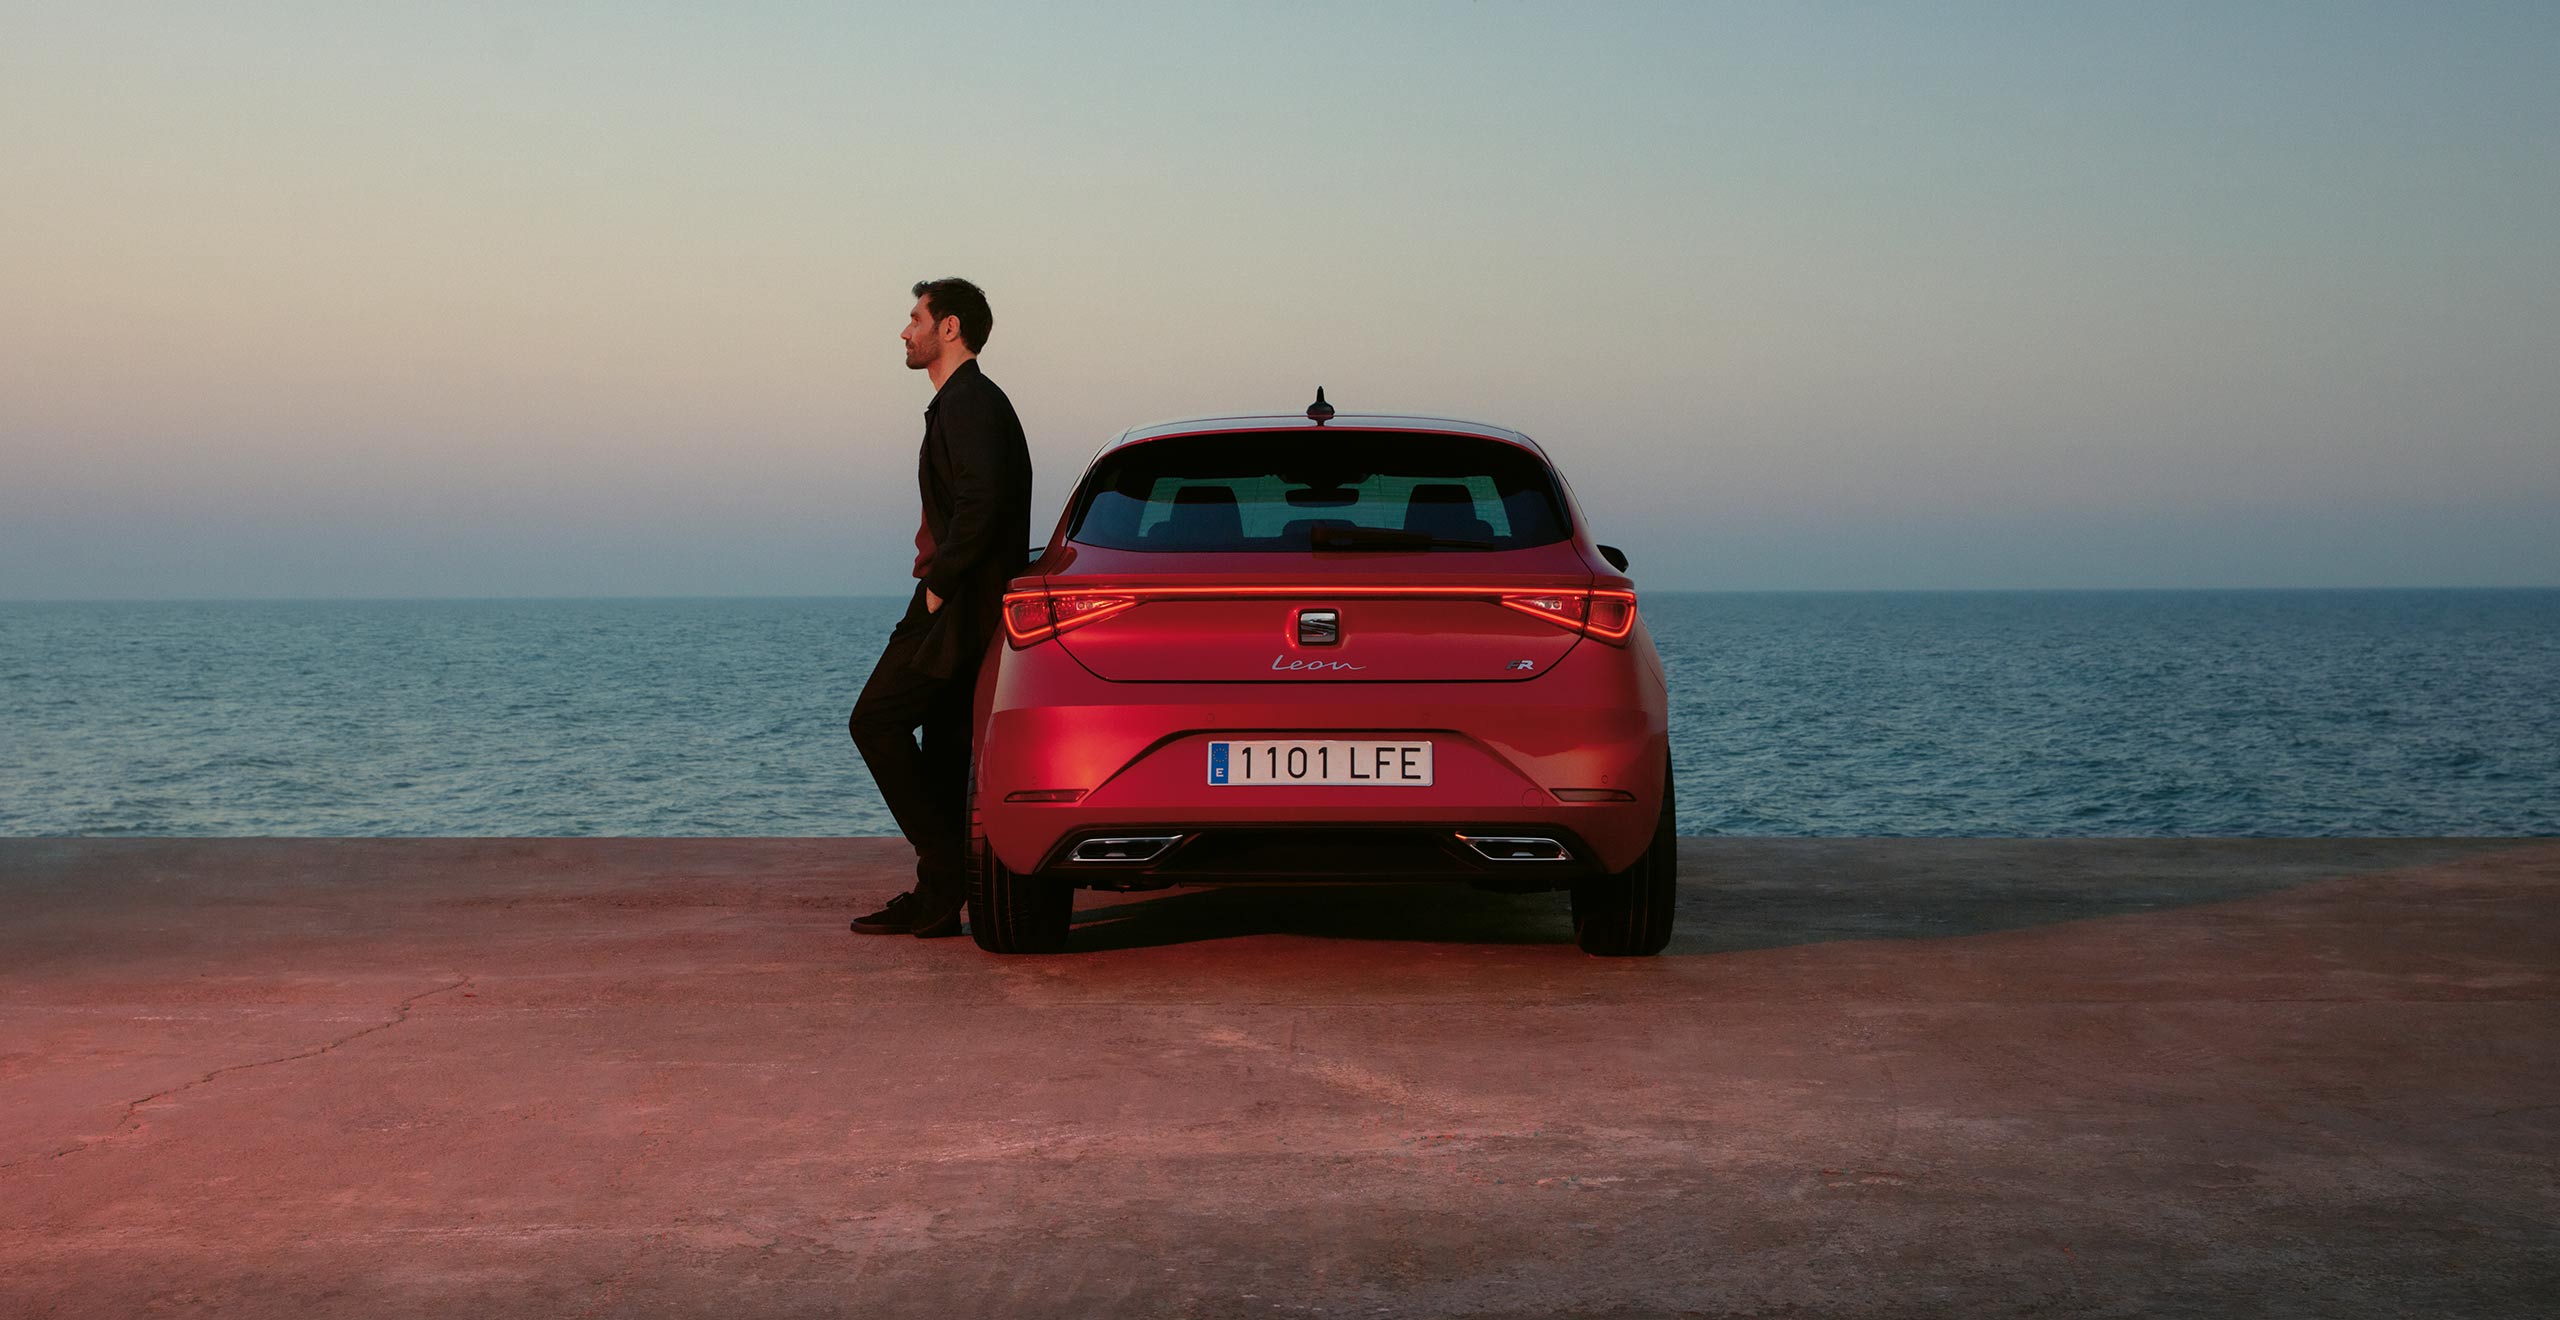 New SEAT Leon desire red colour with the rear to rear coast lights